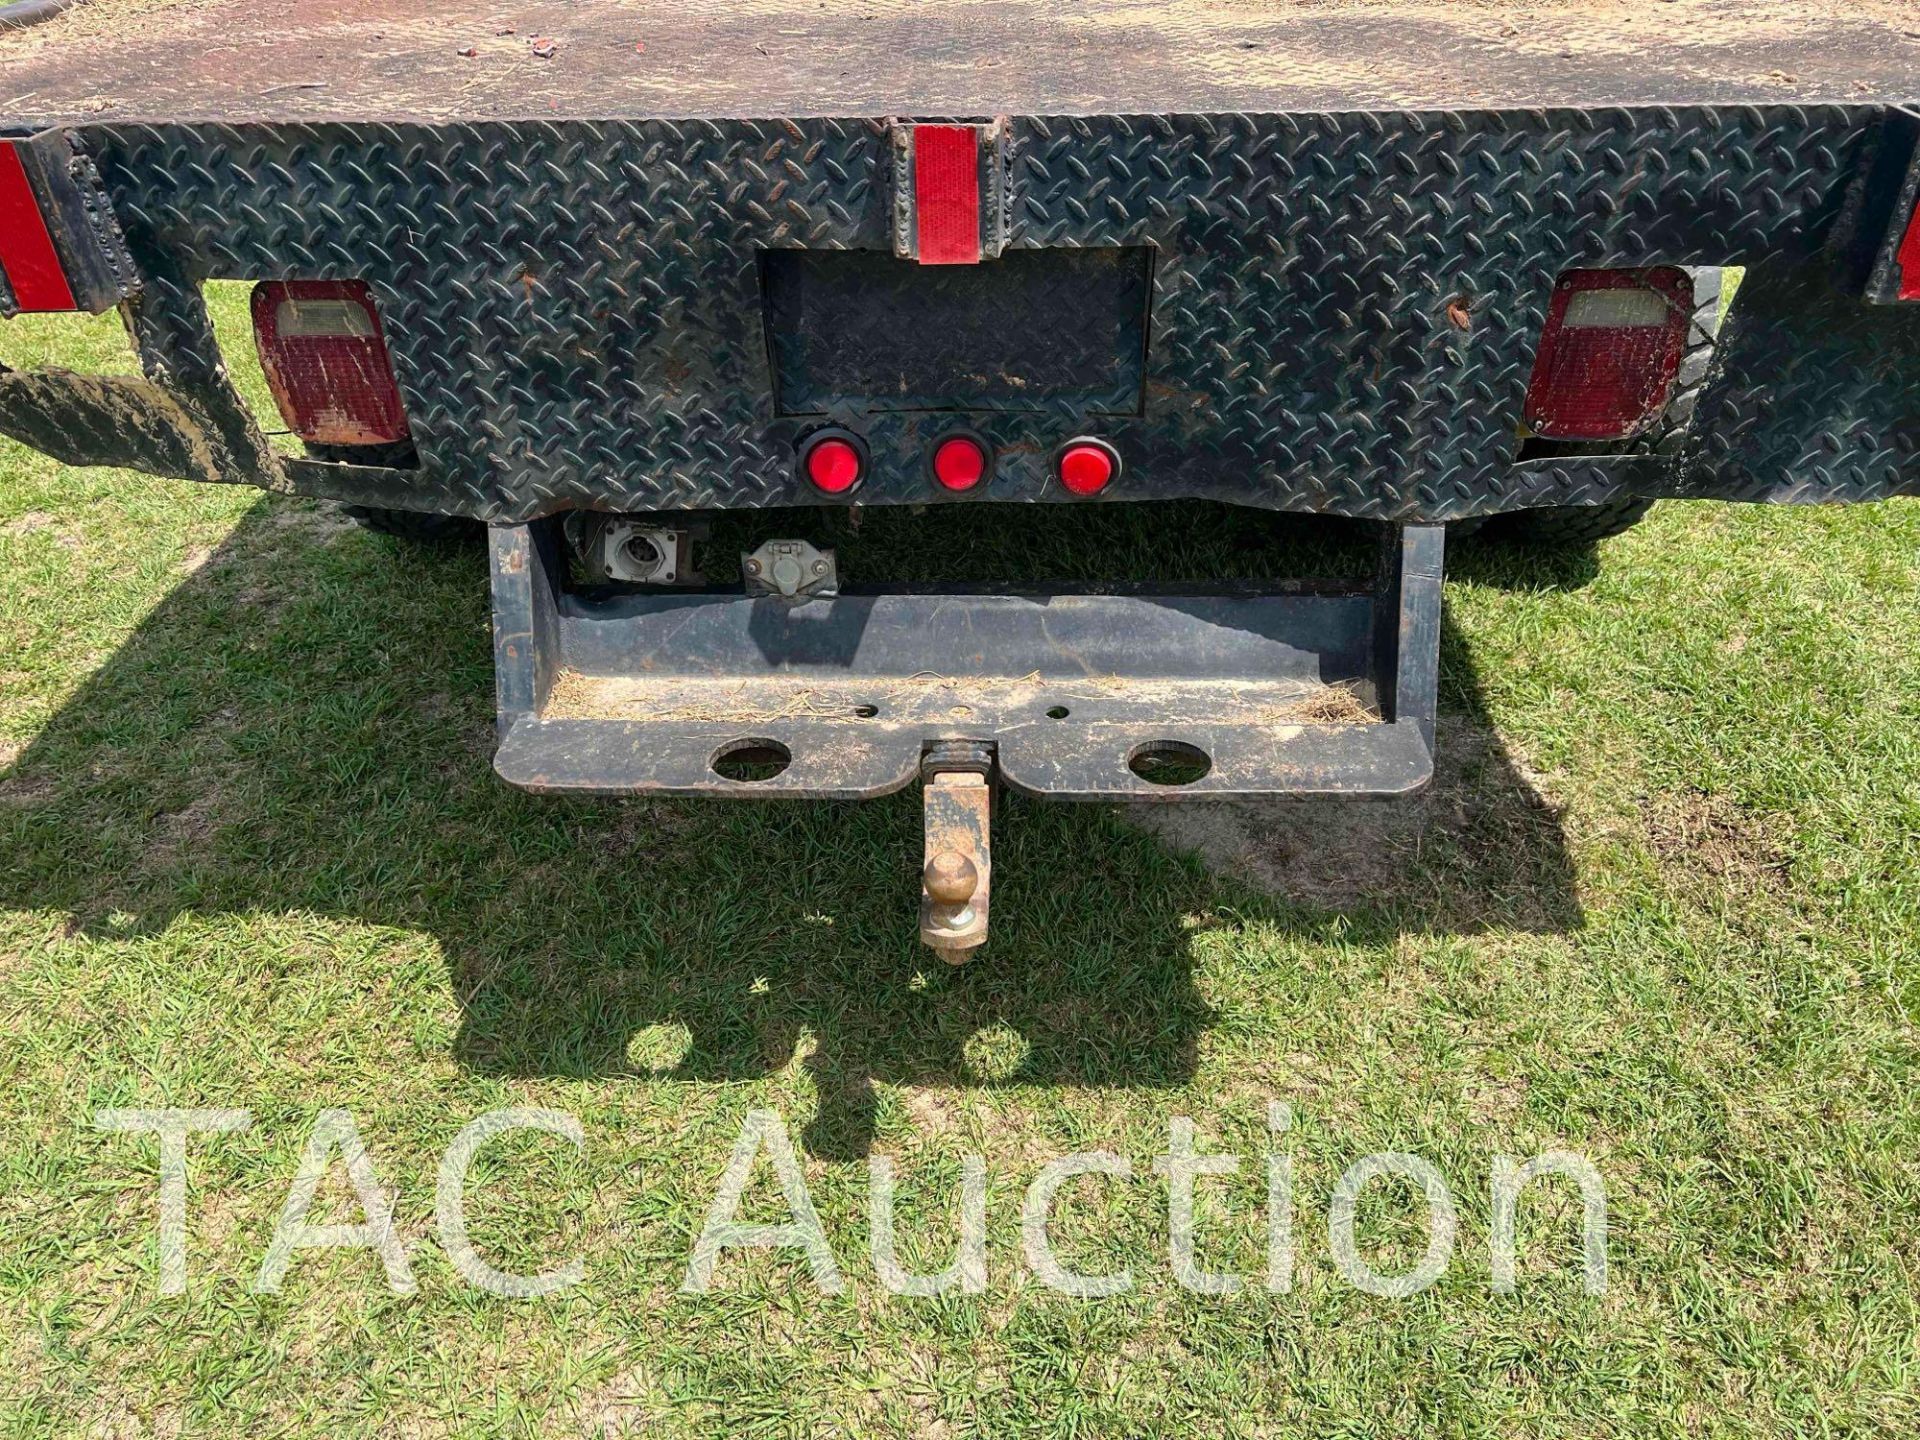 2000 Ford F350 4x4 Extended Cab Flatbed Truck - Image 13 of 55